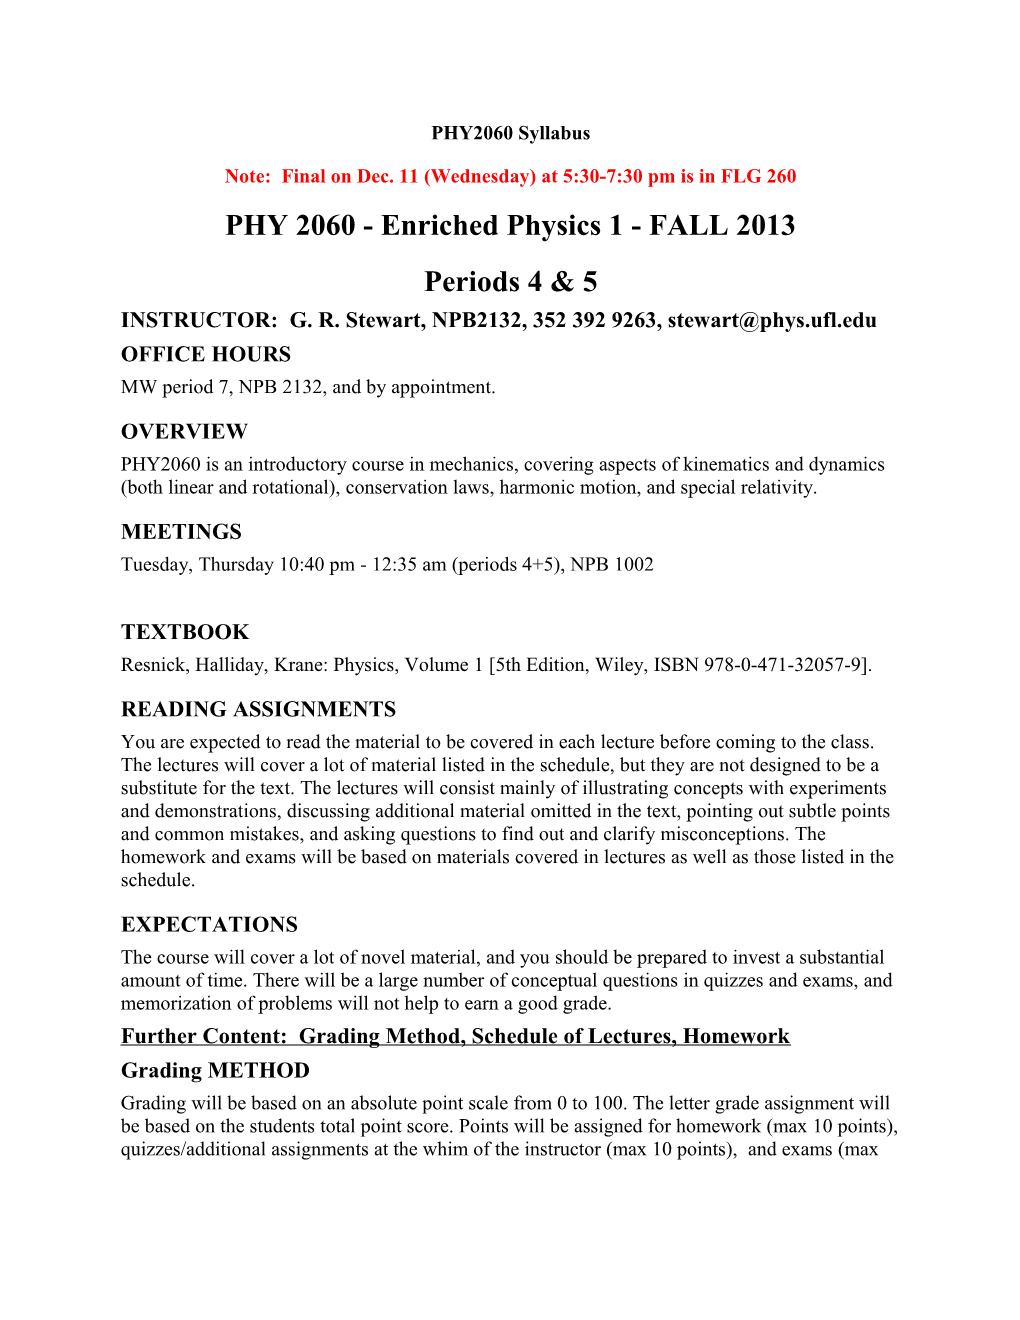 PHY 2060 - Enriched Physics 1 - FALL 2013